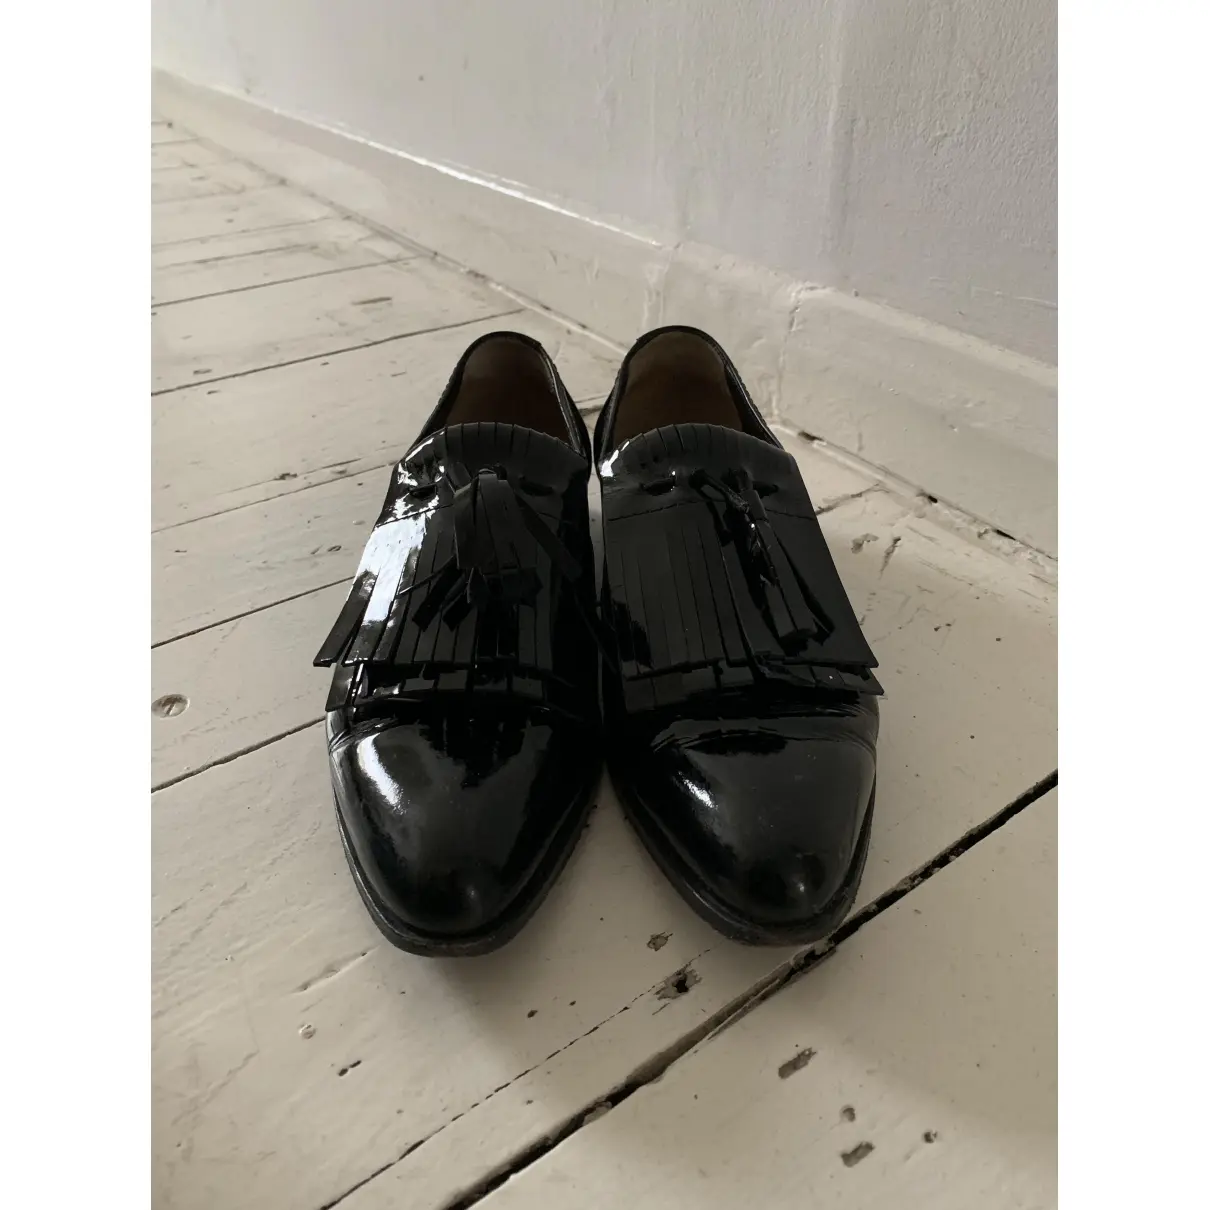 Lanvin Patent leather flats for sale